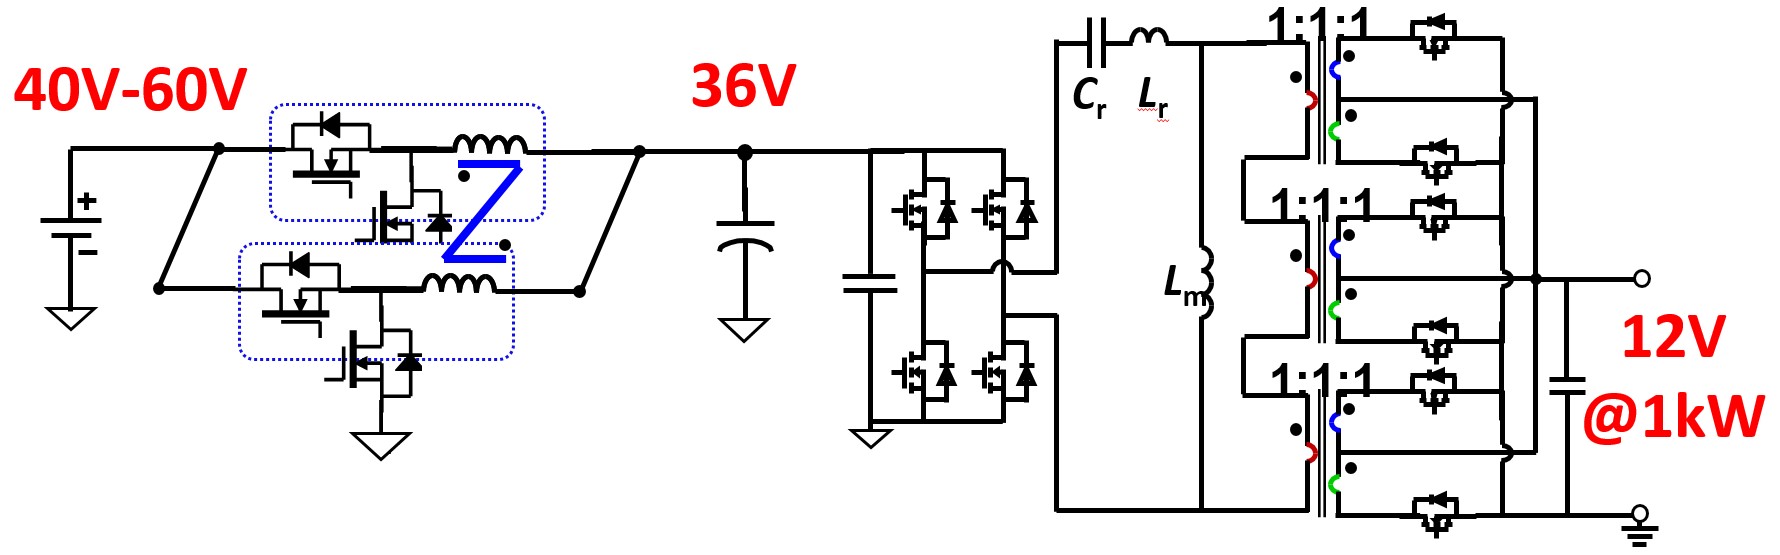 Image of two stage structure with matrix transformer.